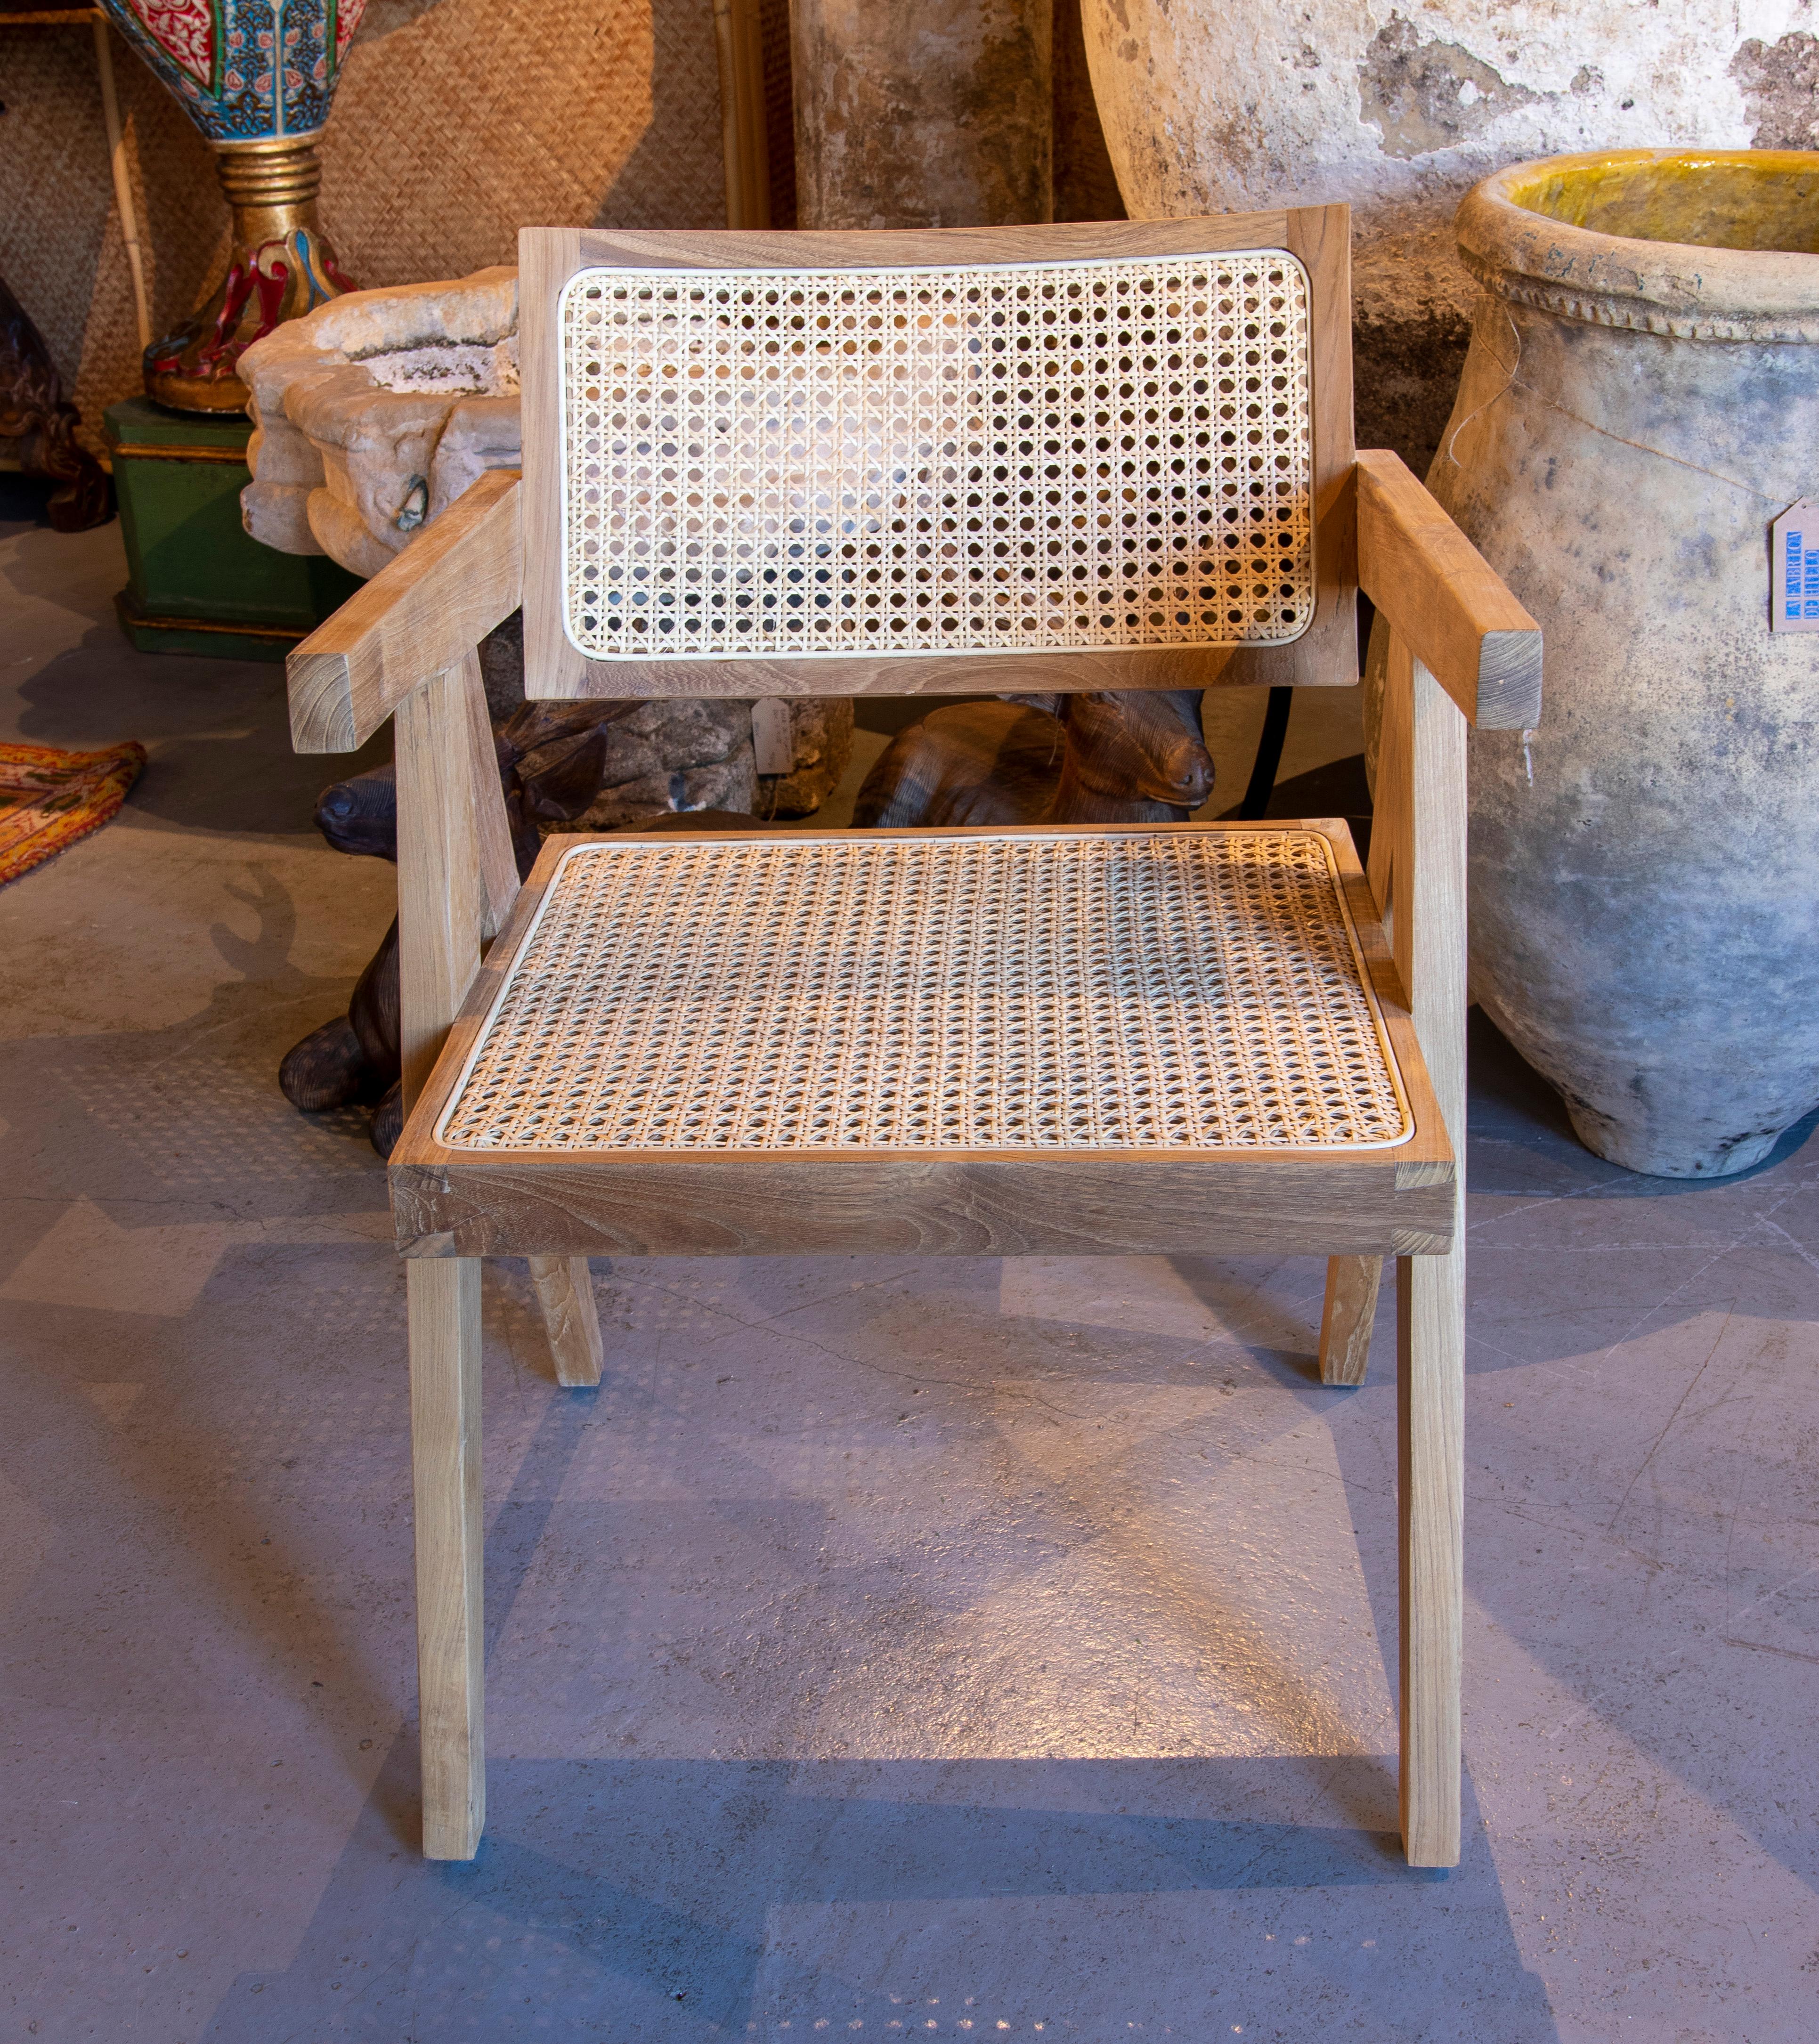 Spanish Set of Wooden Chairs and Seat with Wicker Backrest